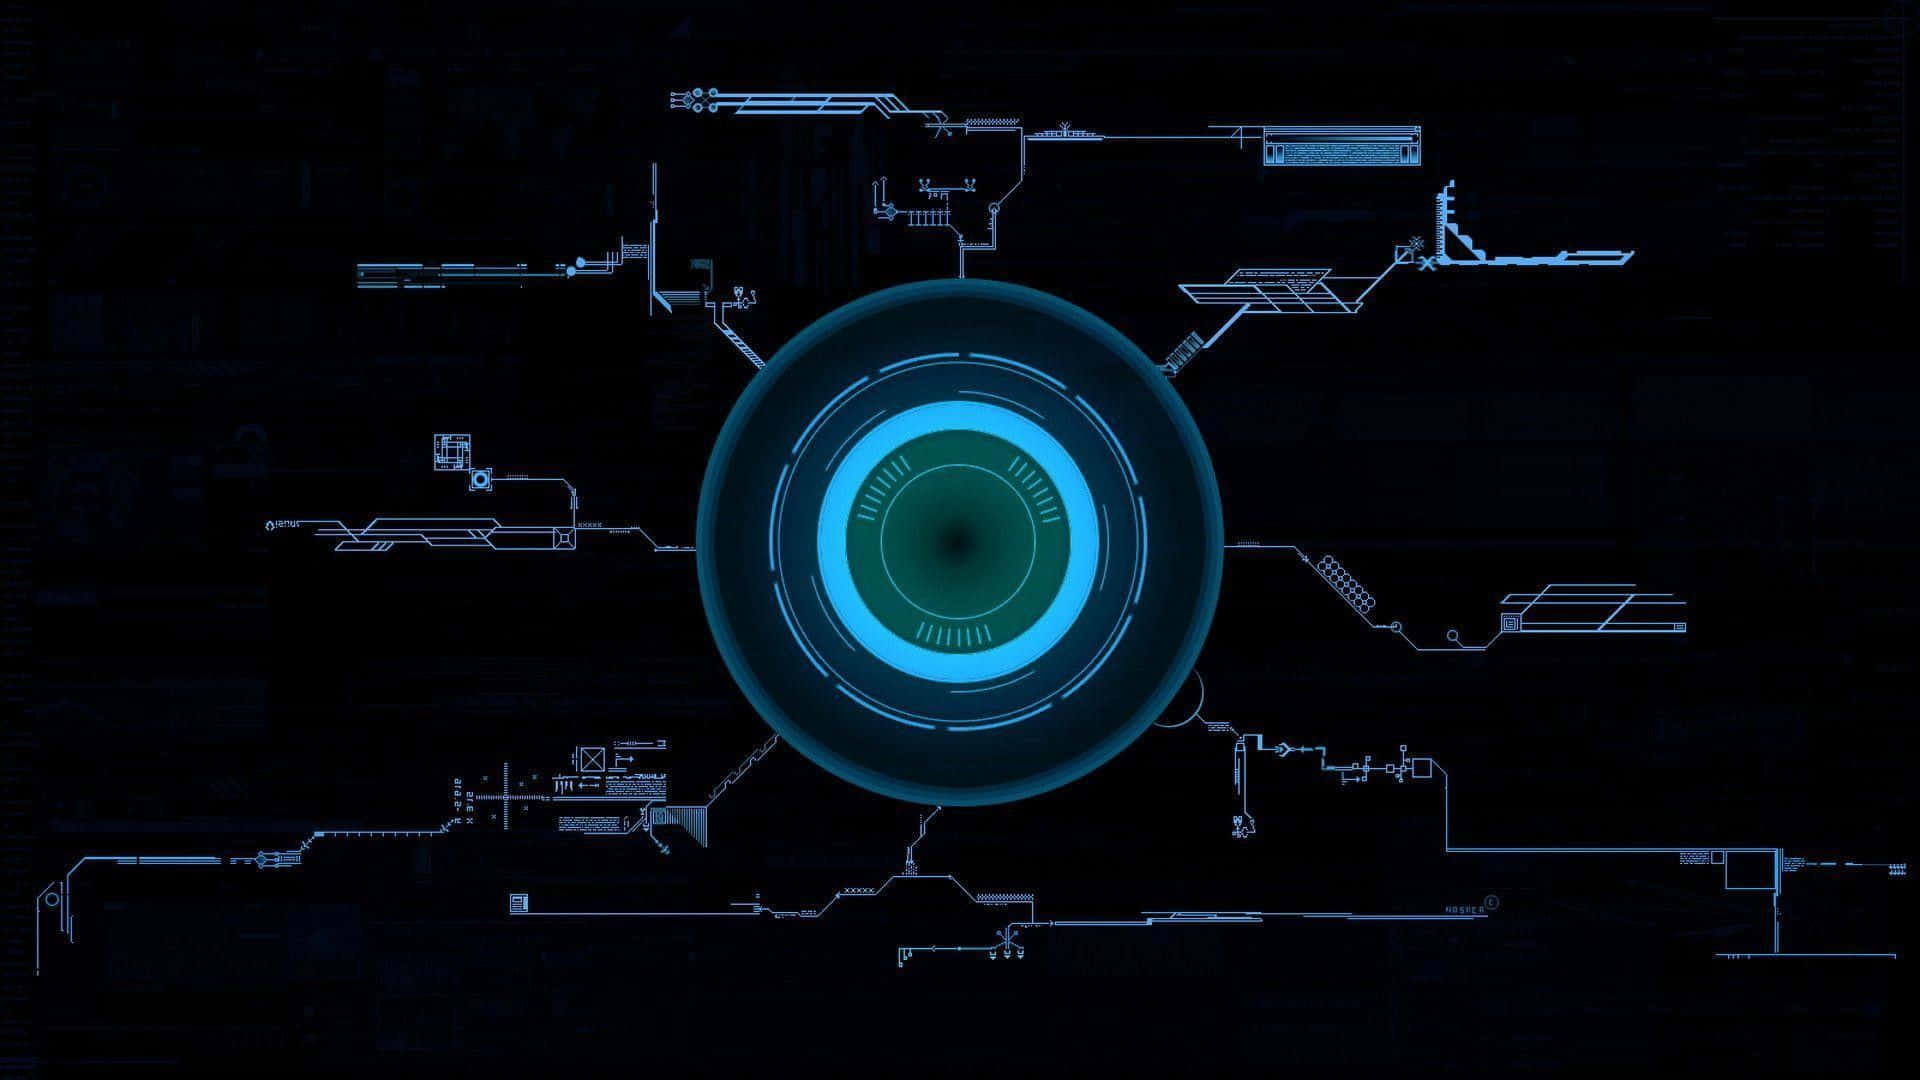 Tony Stark Lights up the Evening with His Arc Reactor Wallpaper